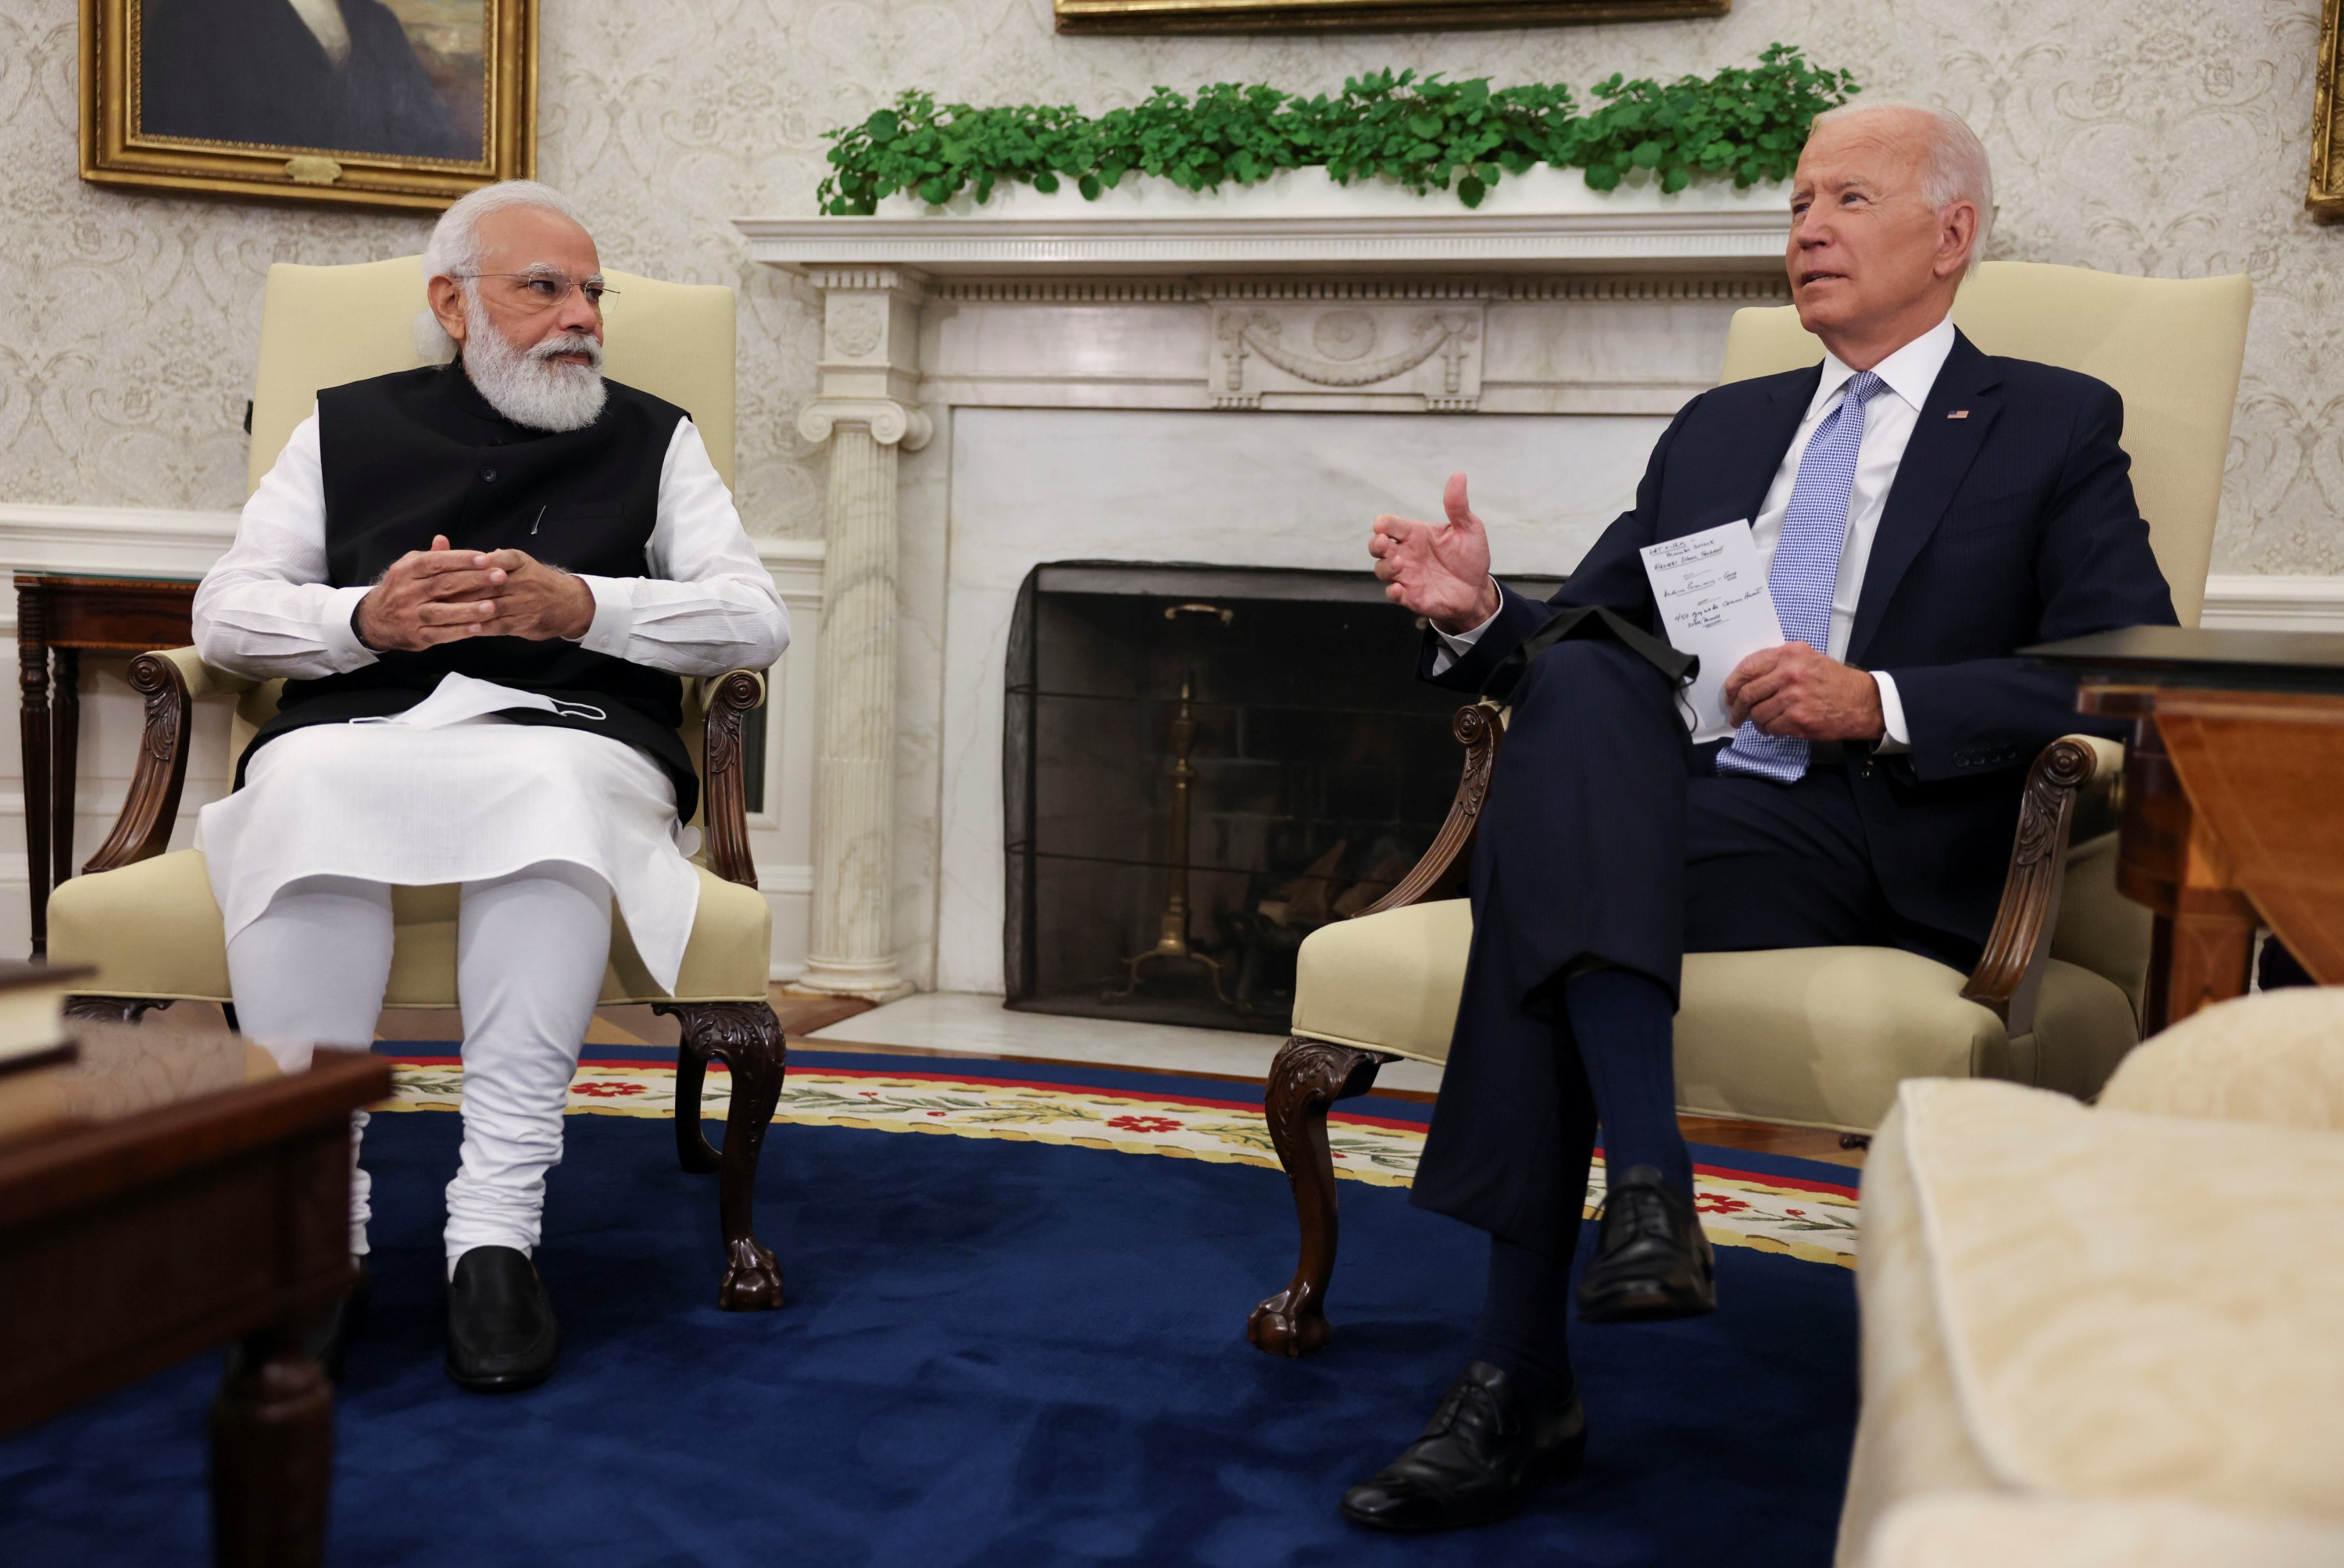 U.S. President Joe Biden meets with India's Prime Minister Narendra Modi in the Oval Office at the White House in Washington, U.S., Sept. 24, 2021. (Reuters Photo)